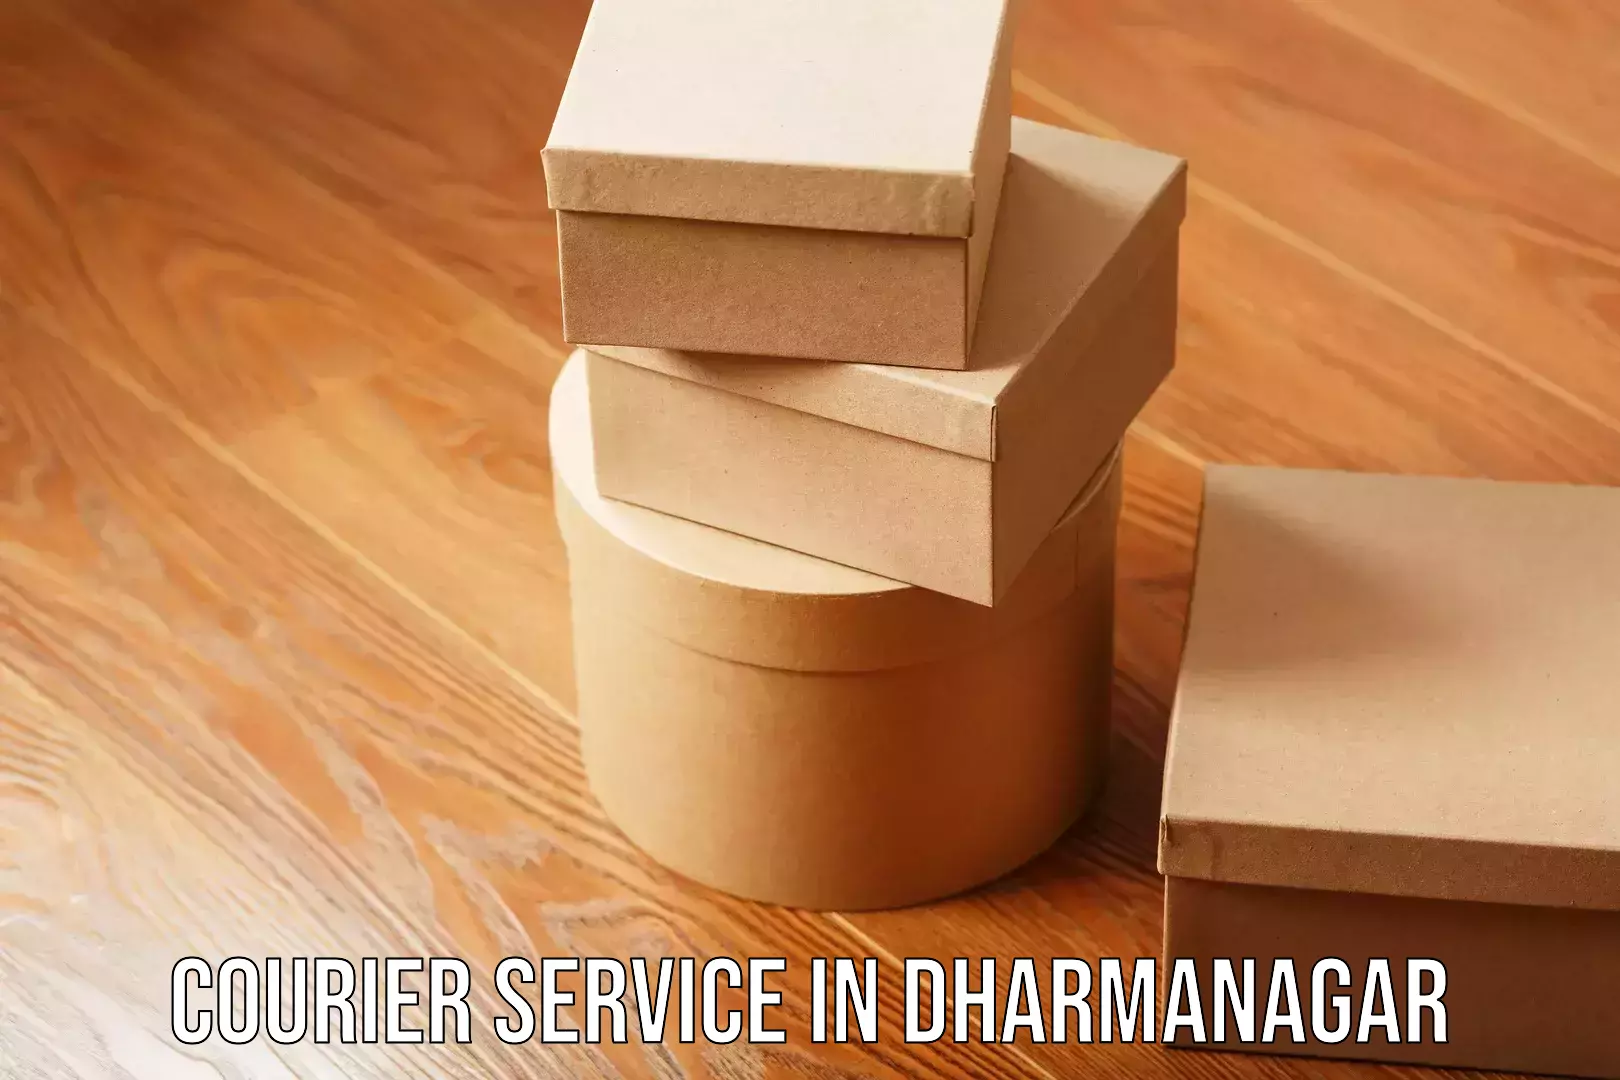 Modern delivery technologies in Dharmanagar